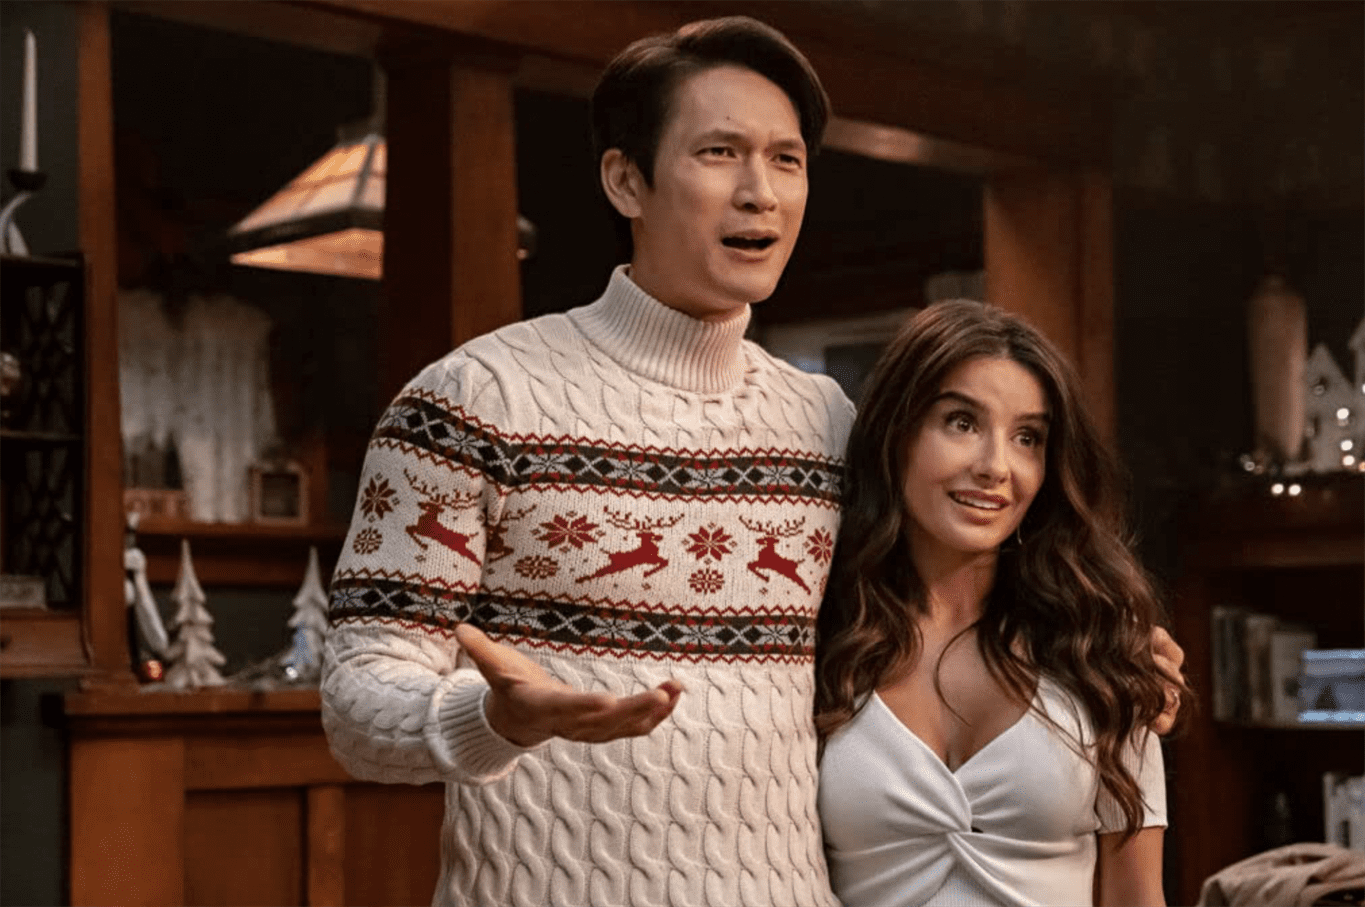 Harry Shum Jr. and Mikaela Hoover portray a married couple in "Love Hard." Photo courtesy of Netflix